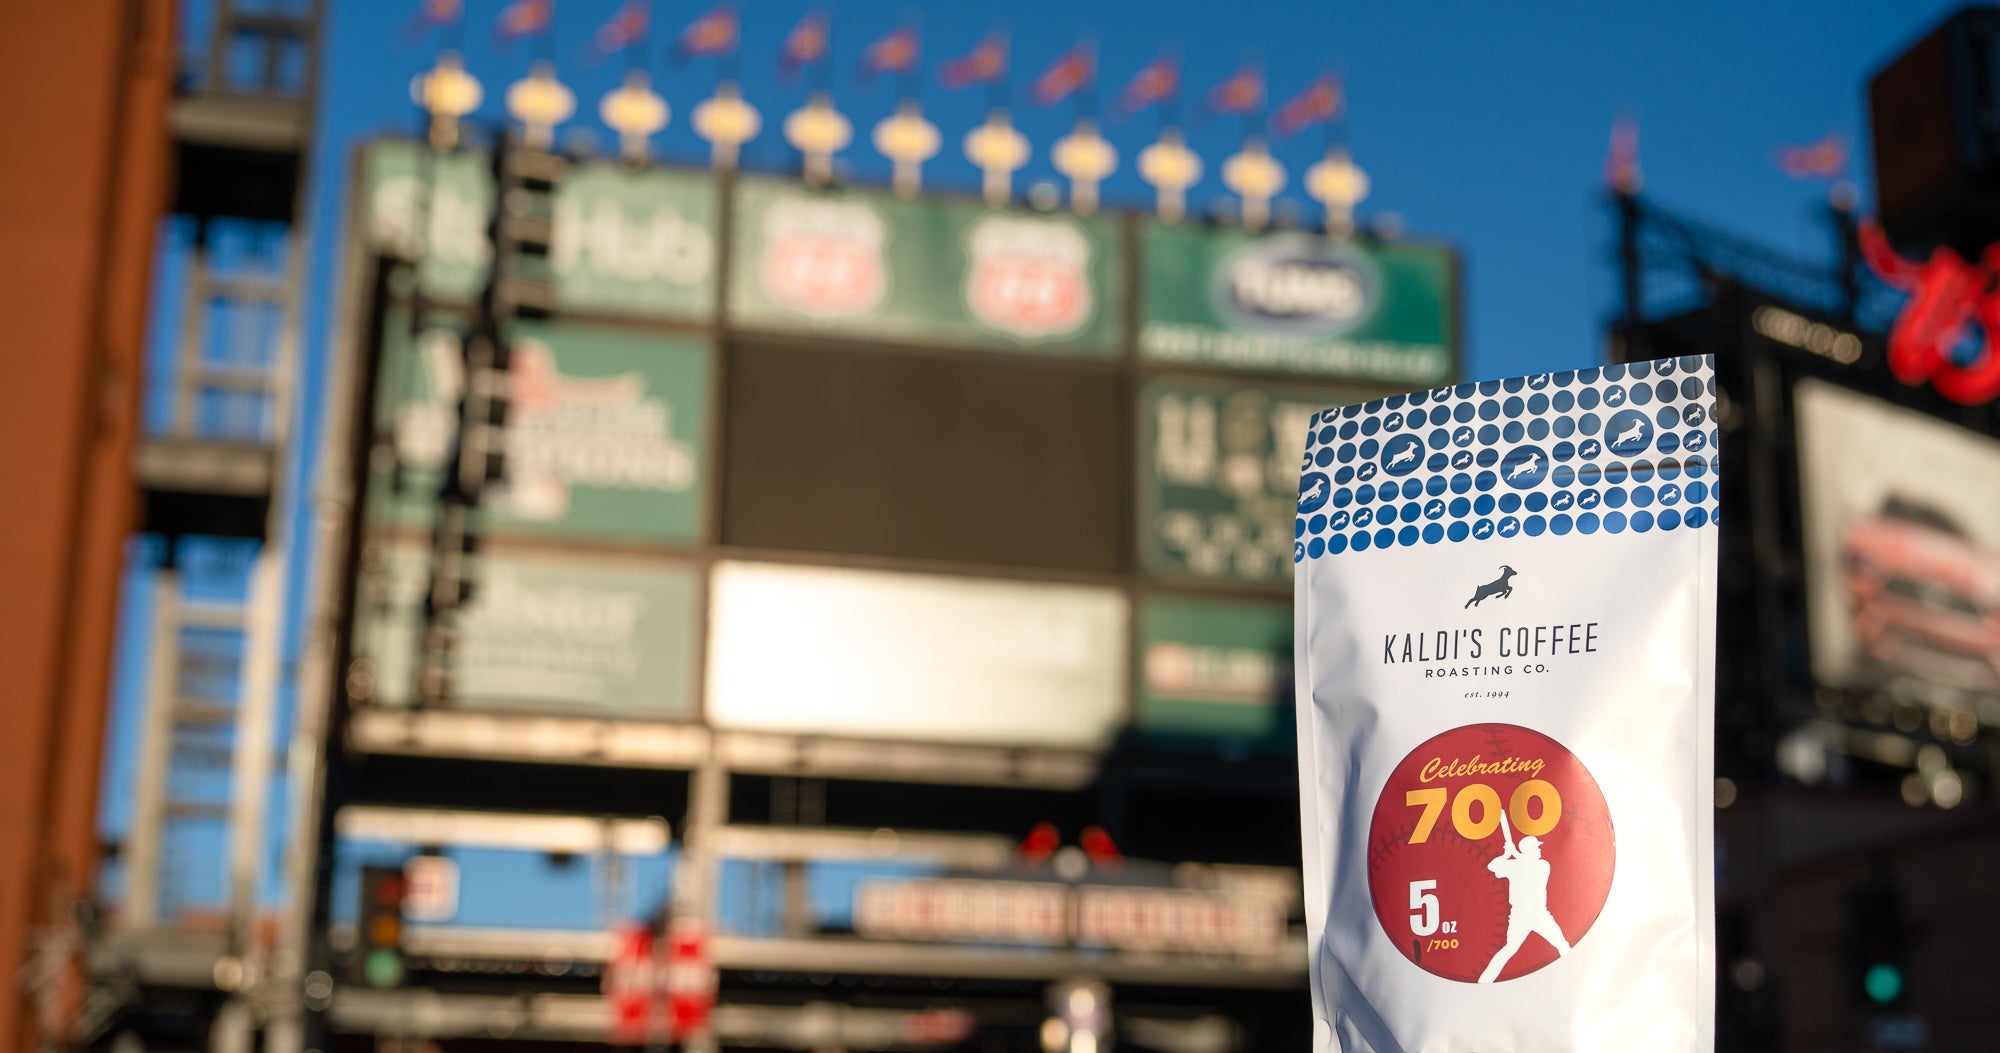 700 blend in front of Busch Stadium to honor Albert Pujols' career 700 plus home runs